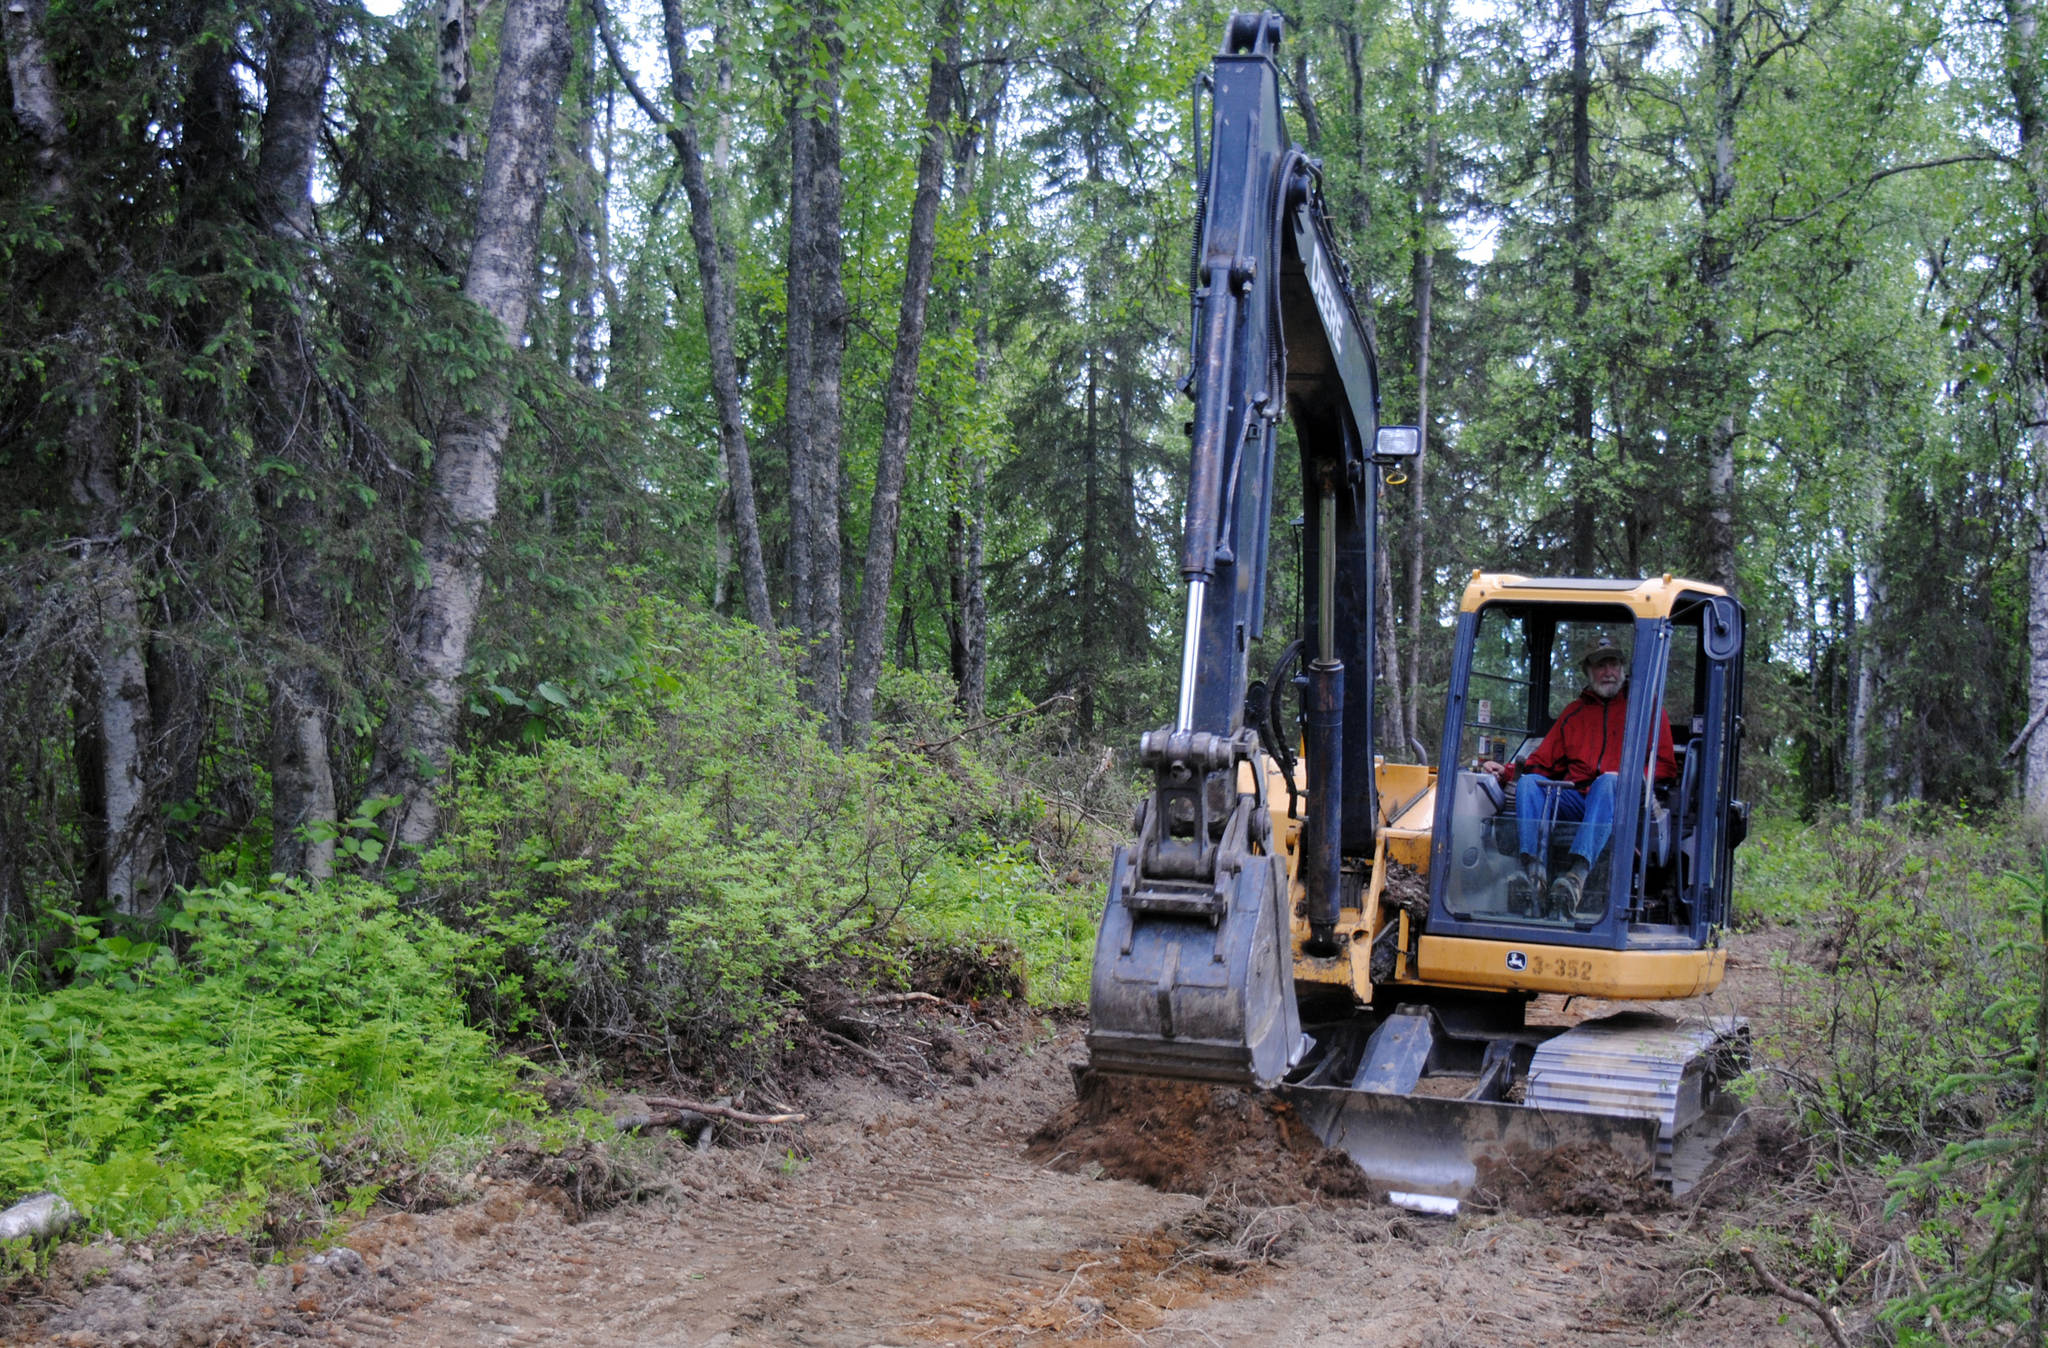 Tsalteshi Trails Maintenance Manager Bill Holt explores the newest edition to the organization’s trail system, a parcel of land to the west of the Sterling Highway on Monday, June 19, 2017 outside Soldotna, Alaska. (Kat Sorensen/Peninsula Clarion)